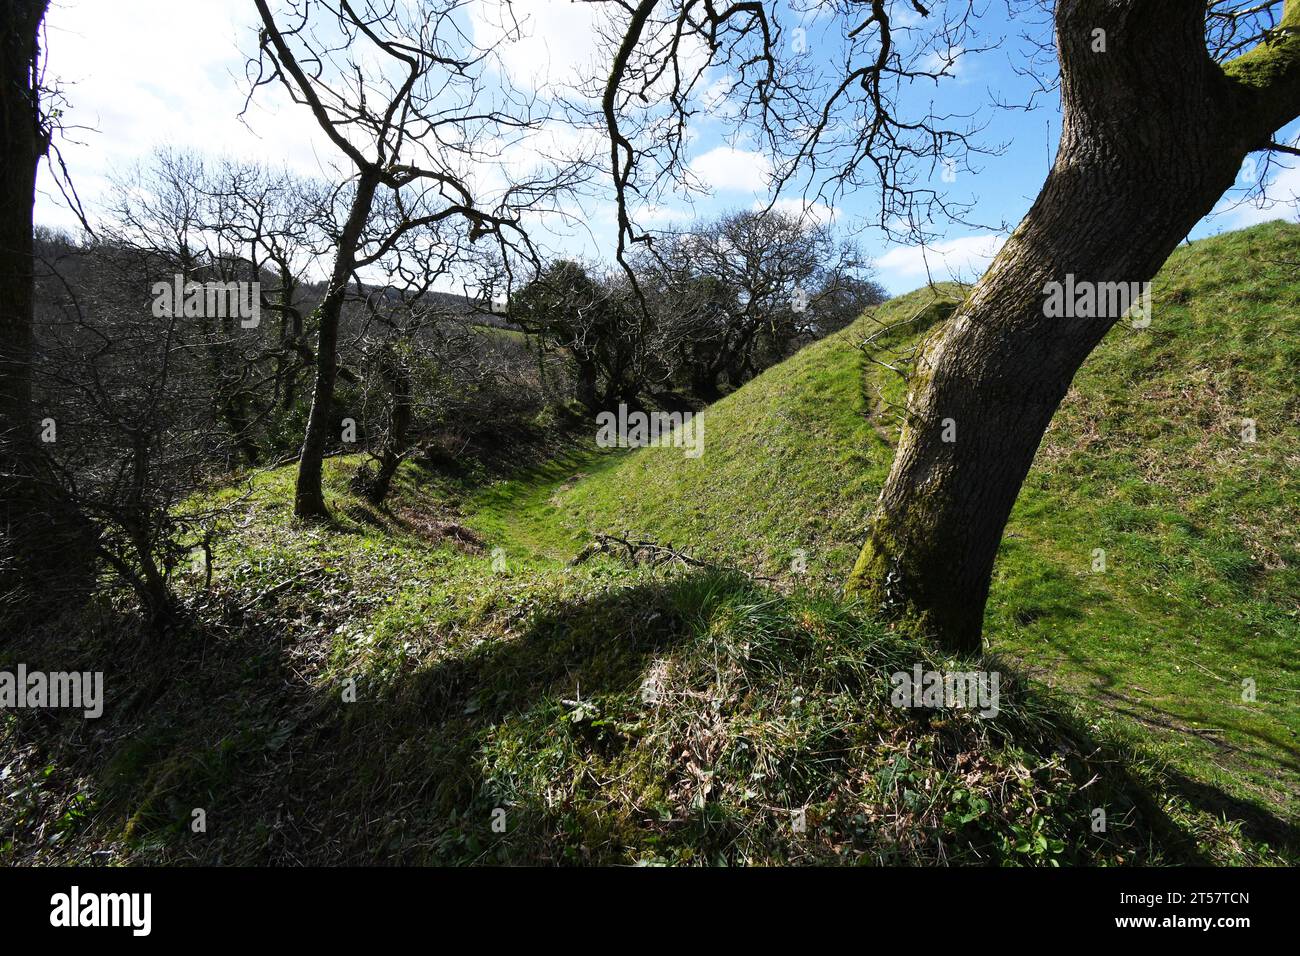 Partially wooded ditch around Kilkhampton castle also known as Penstowe Castle, medieval fort of Motte and Bailey construction built on a knoll protec Stock Photo